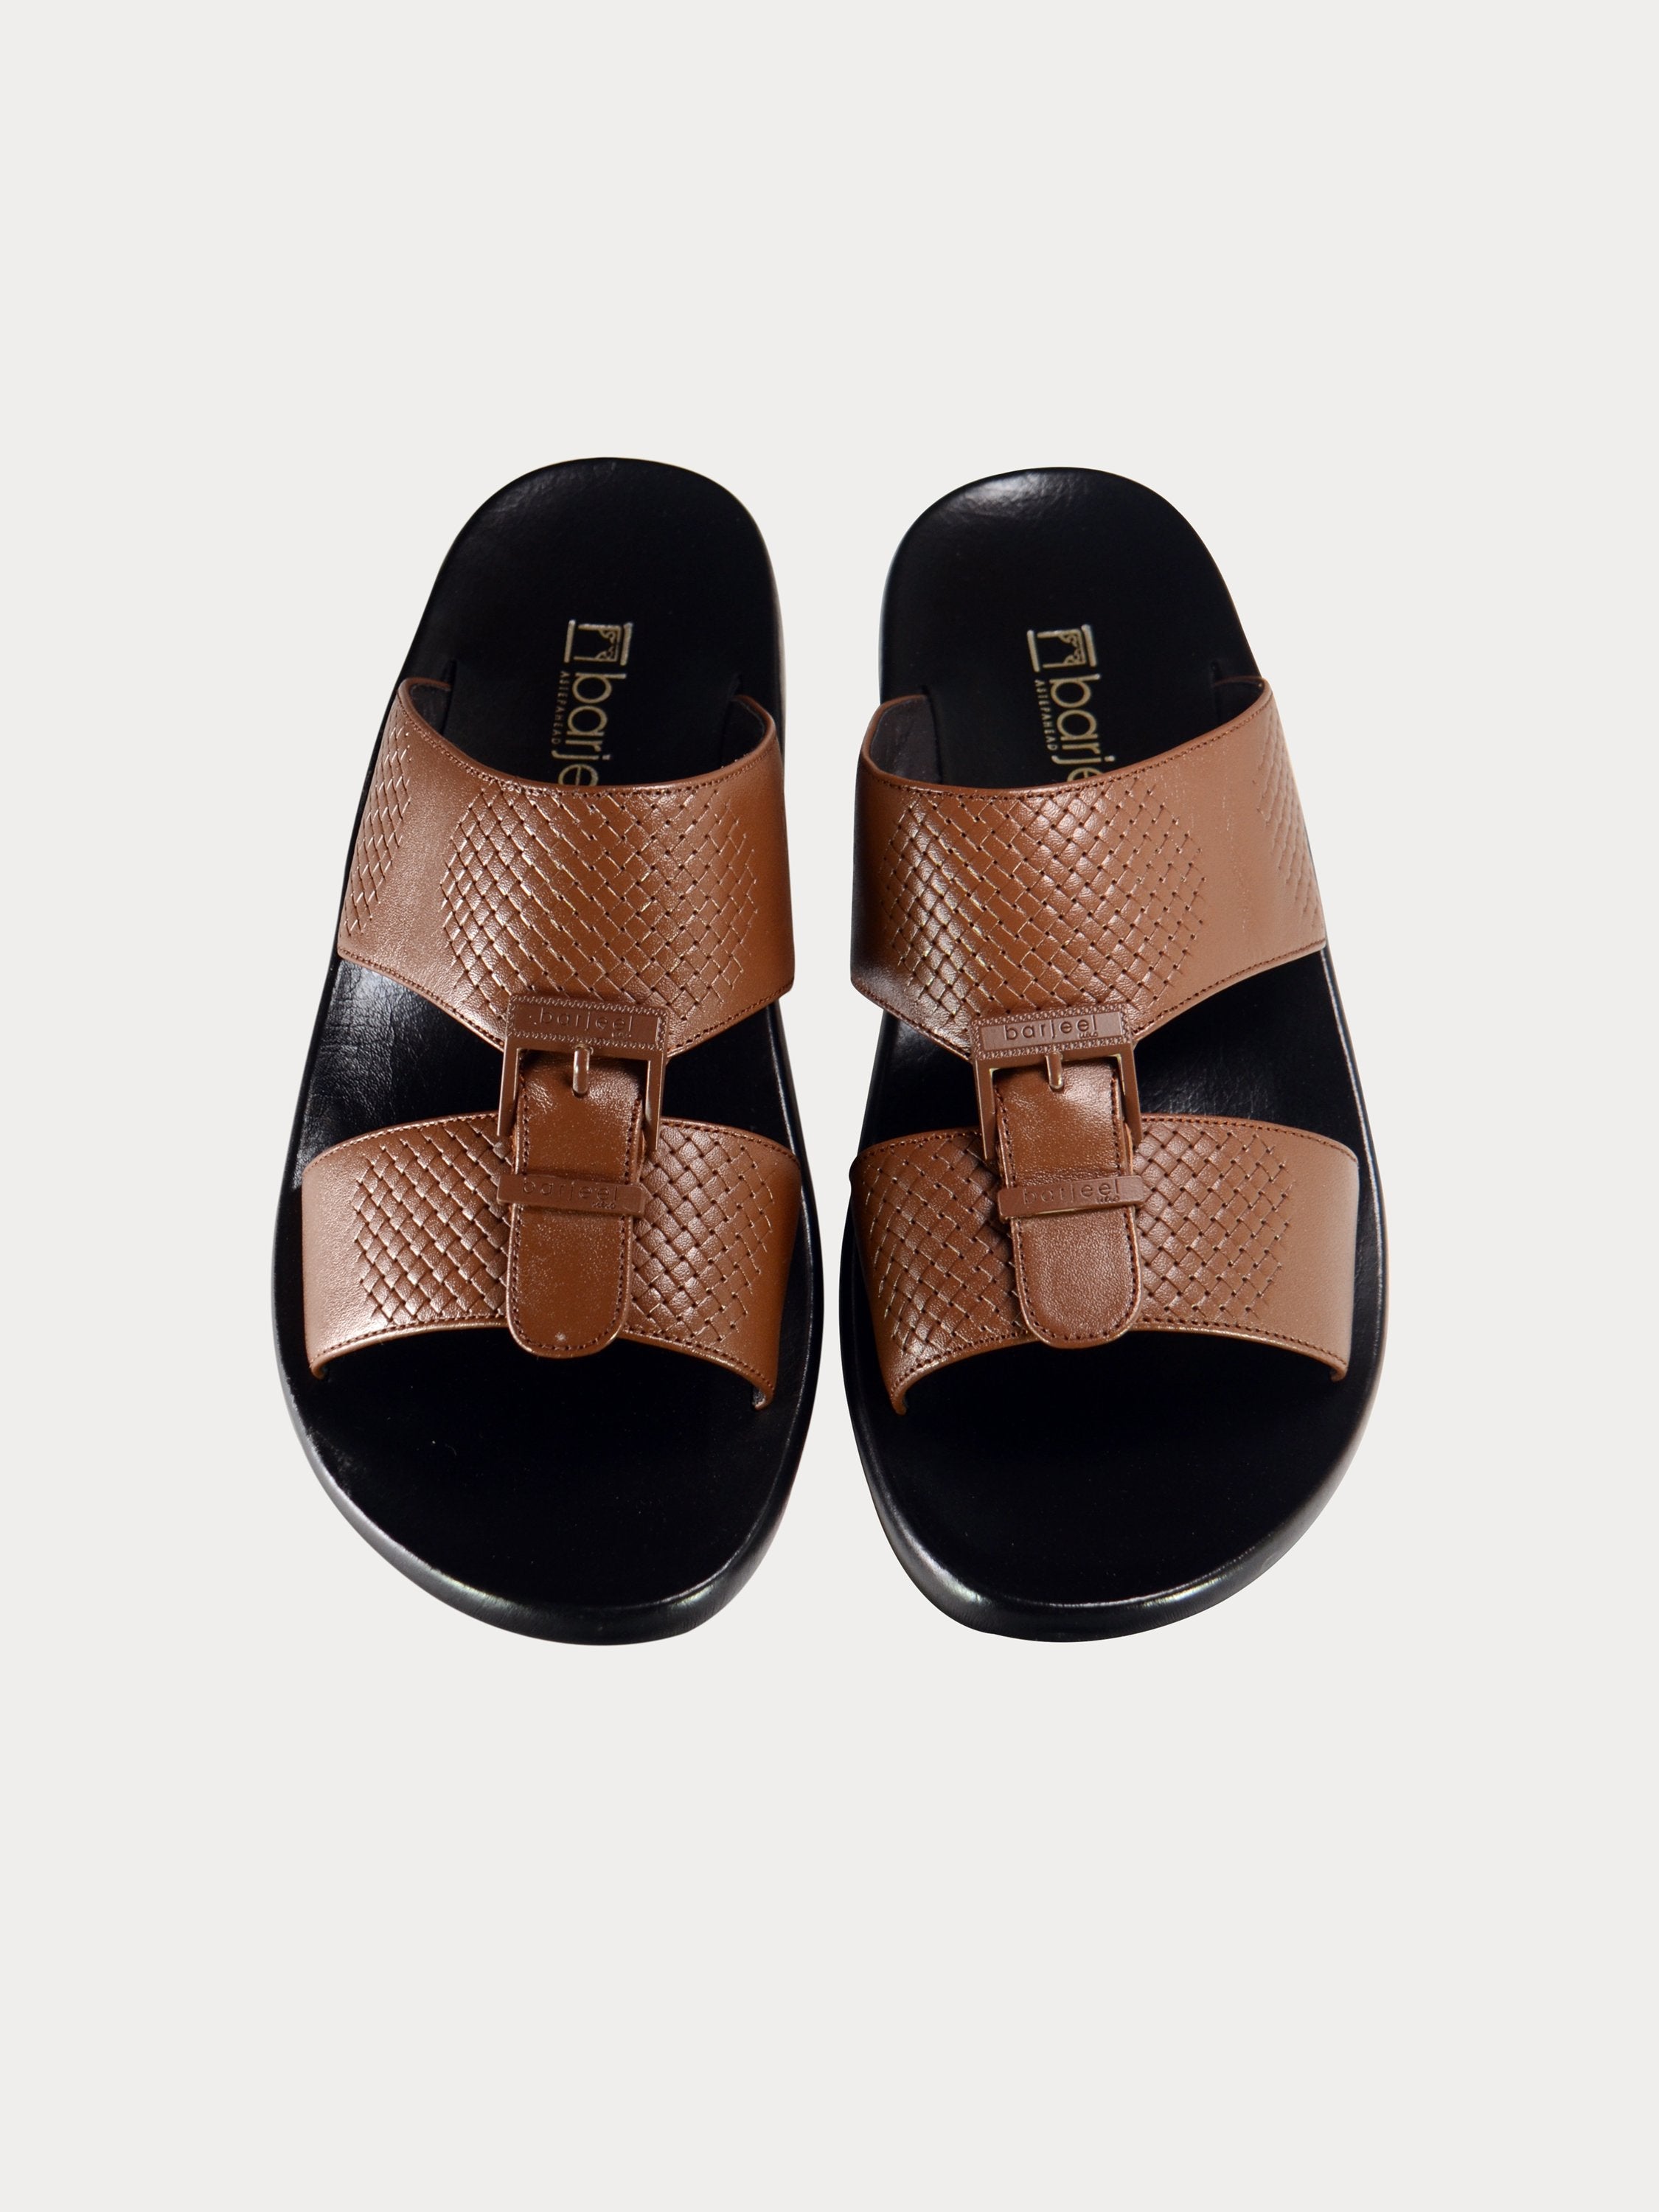 Barjeel Uno A197001 Weave Detailed Arabic Leather Sandals #color_Brown